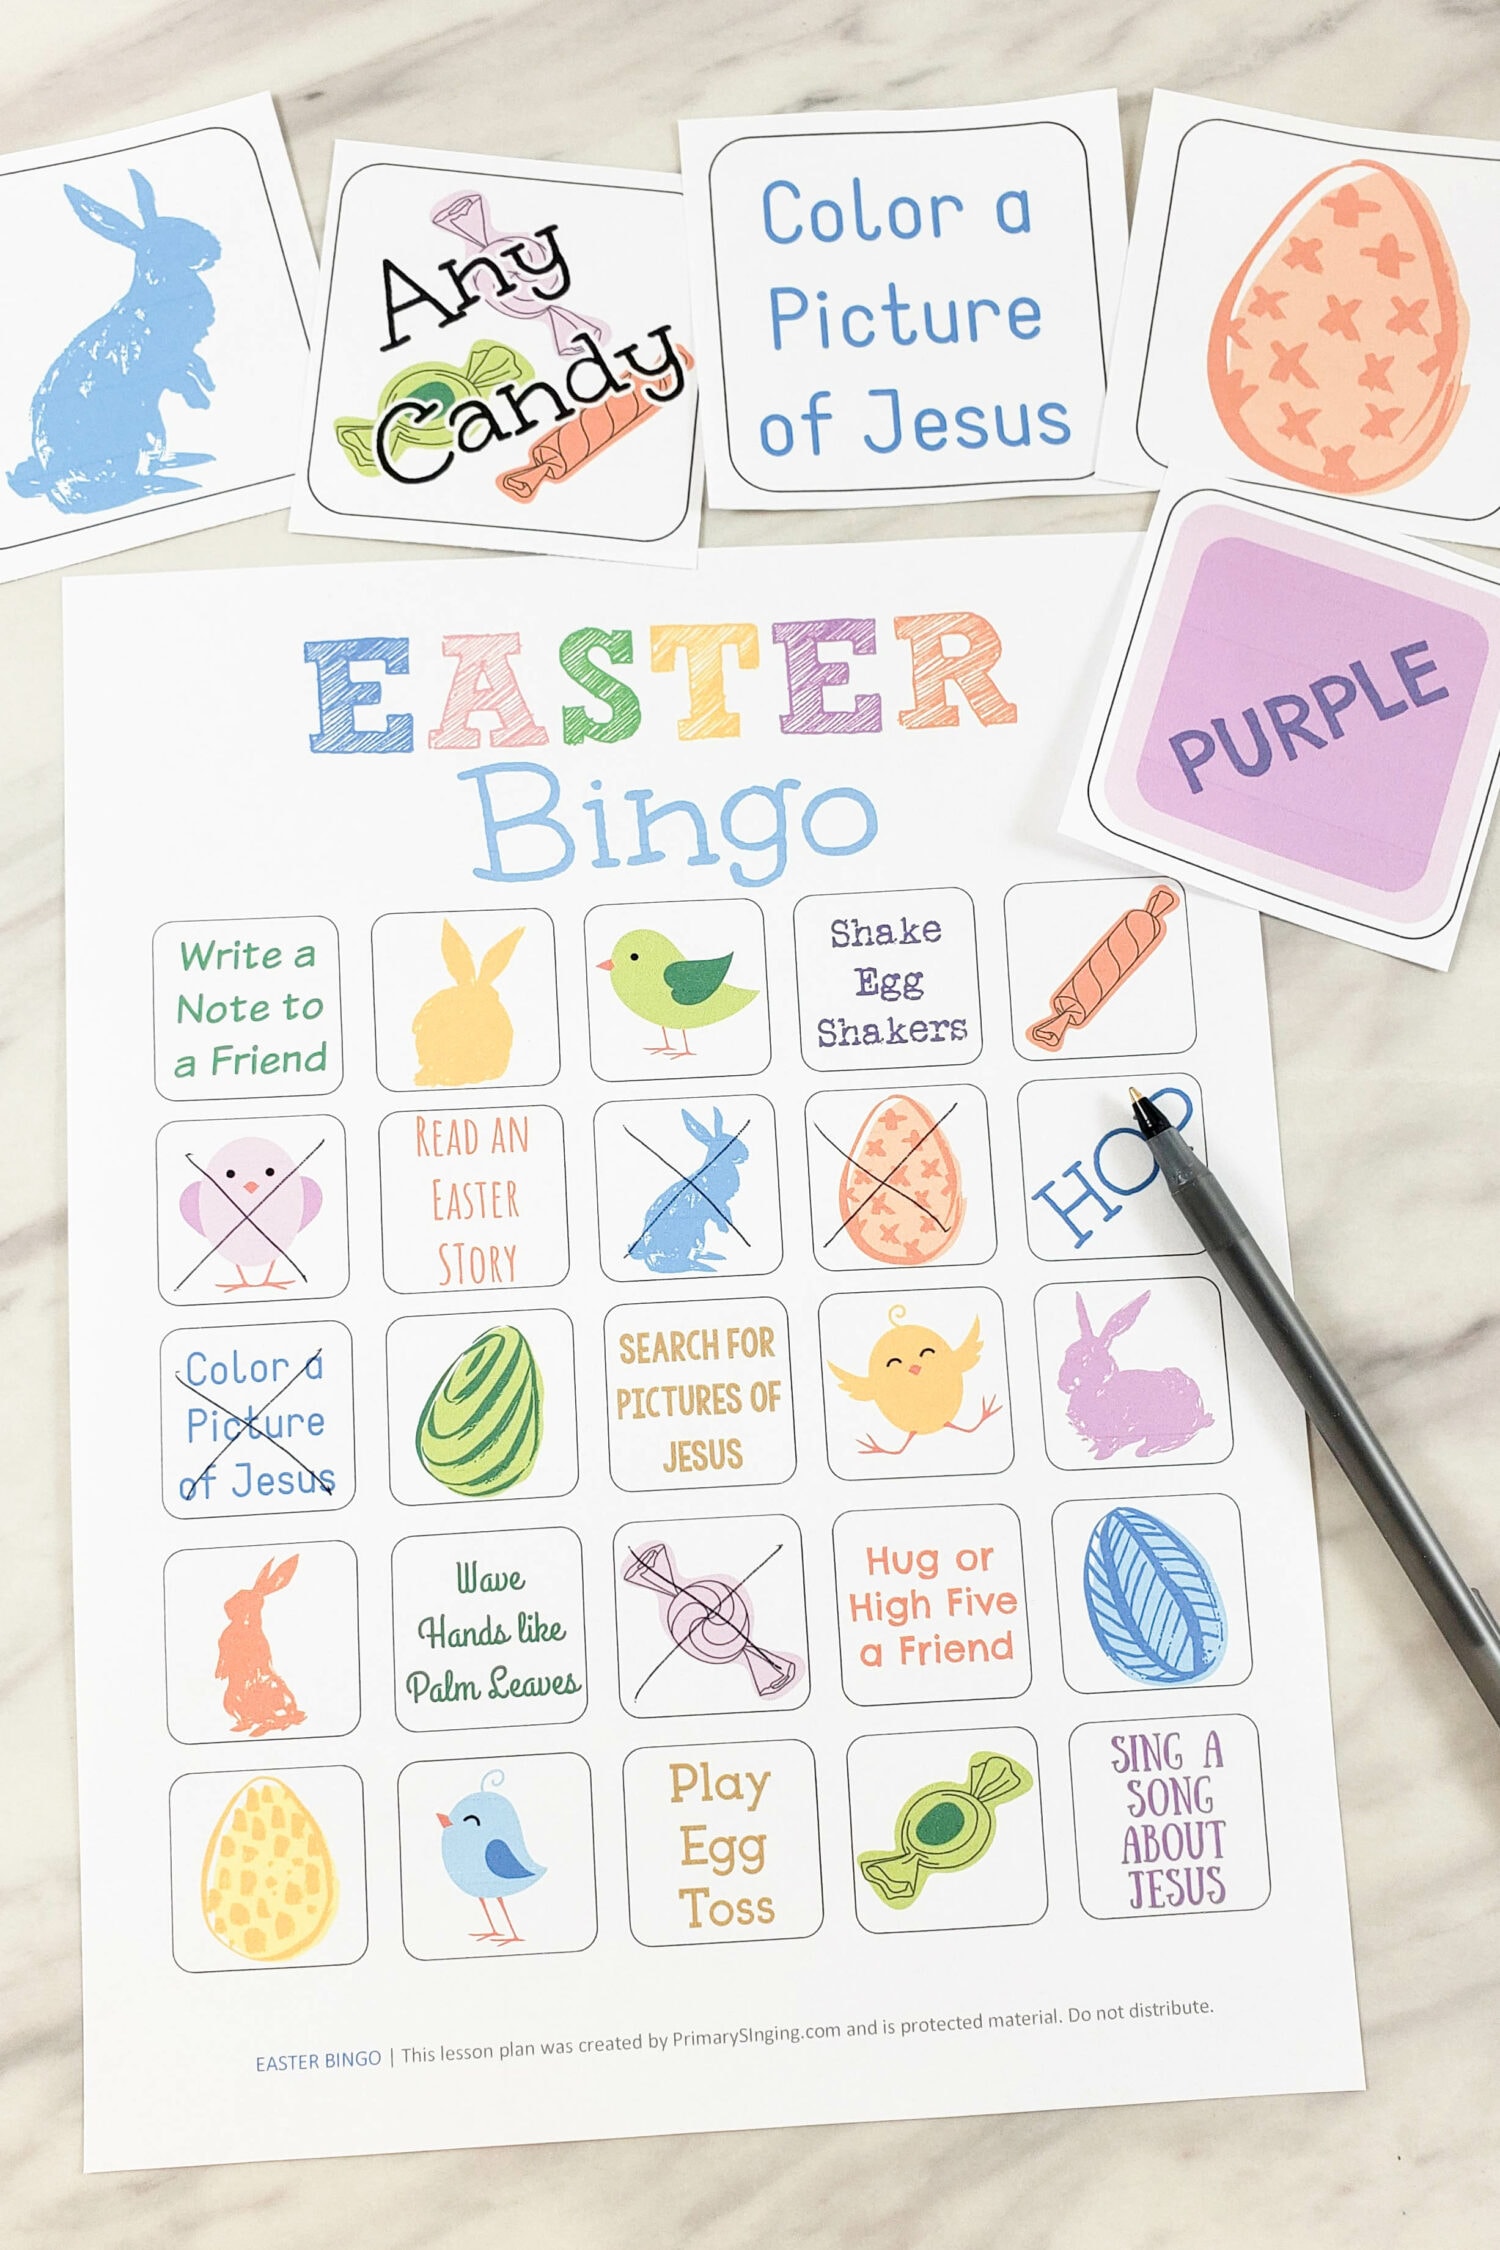 Fun printable Bingo game card for Easter with cards to draw to select which piece is drawn including cute symbols for Easter